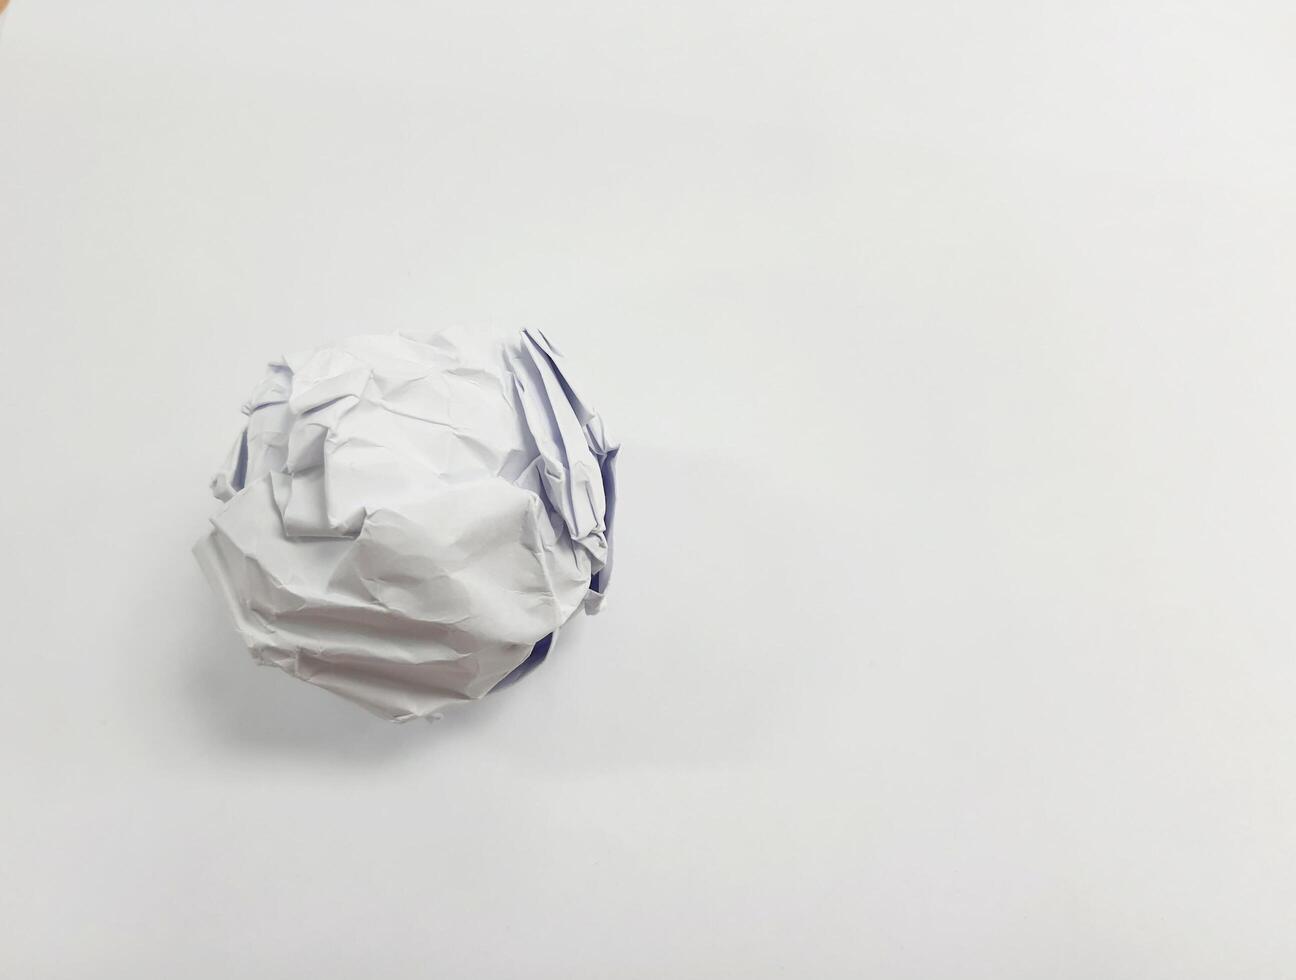 The paper ball image photo